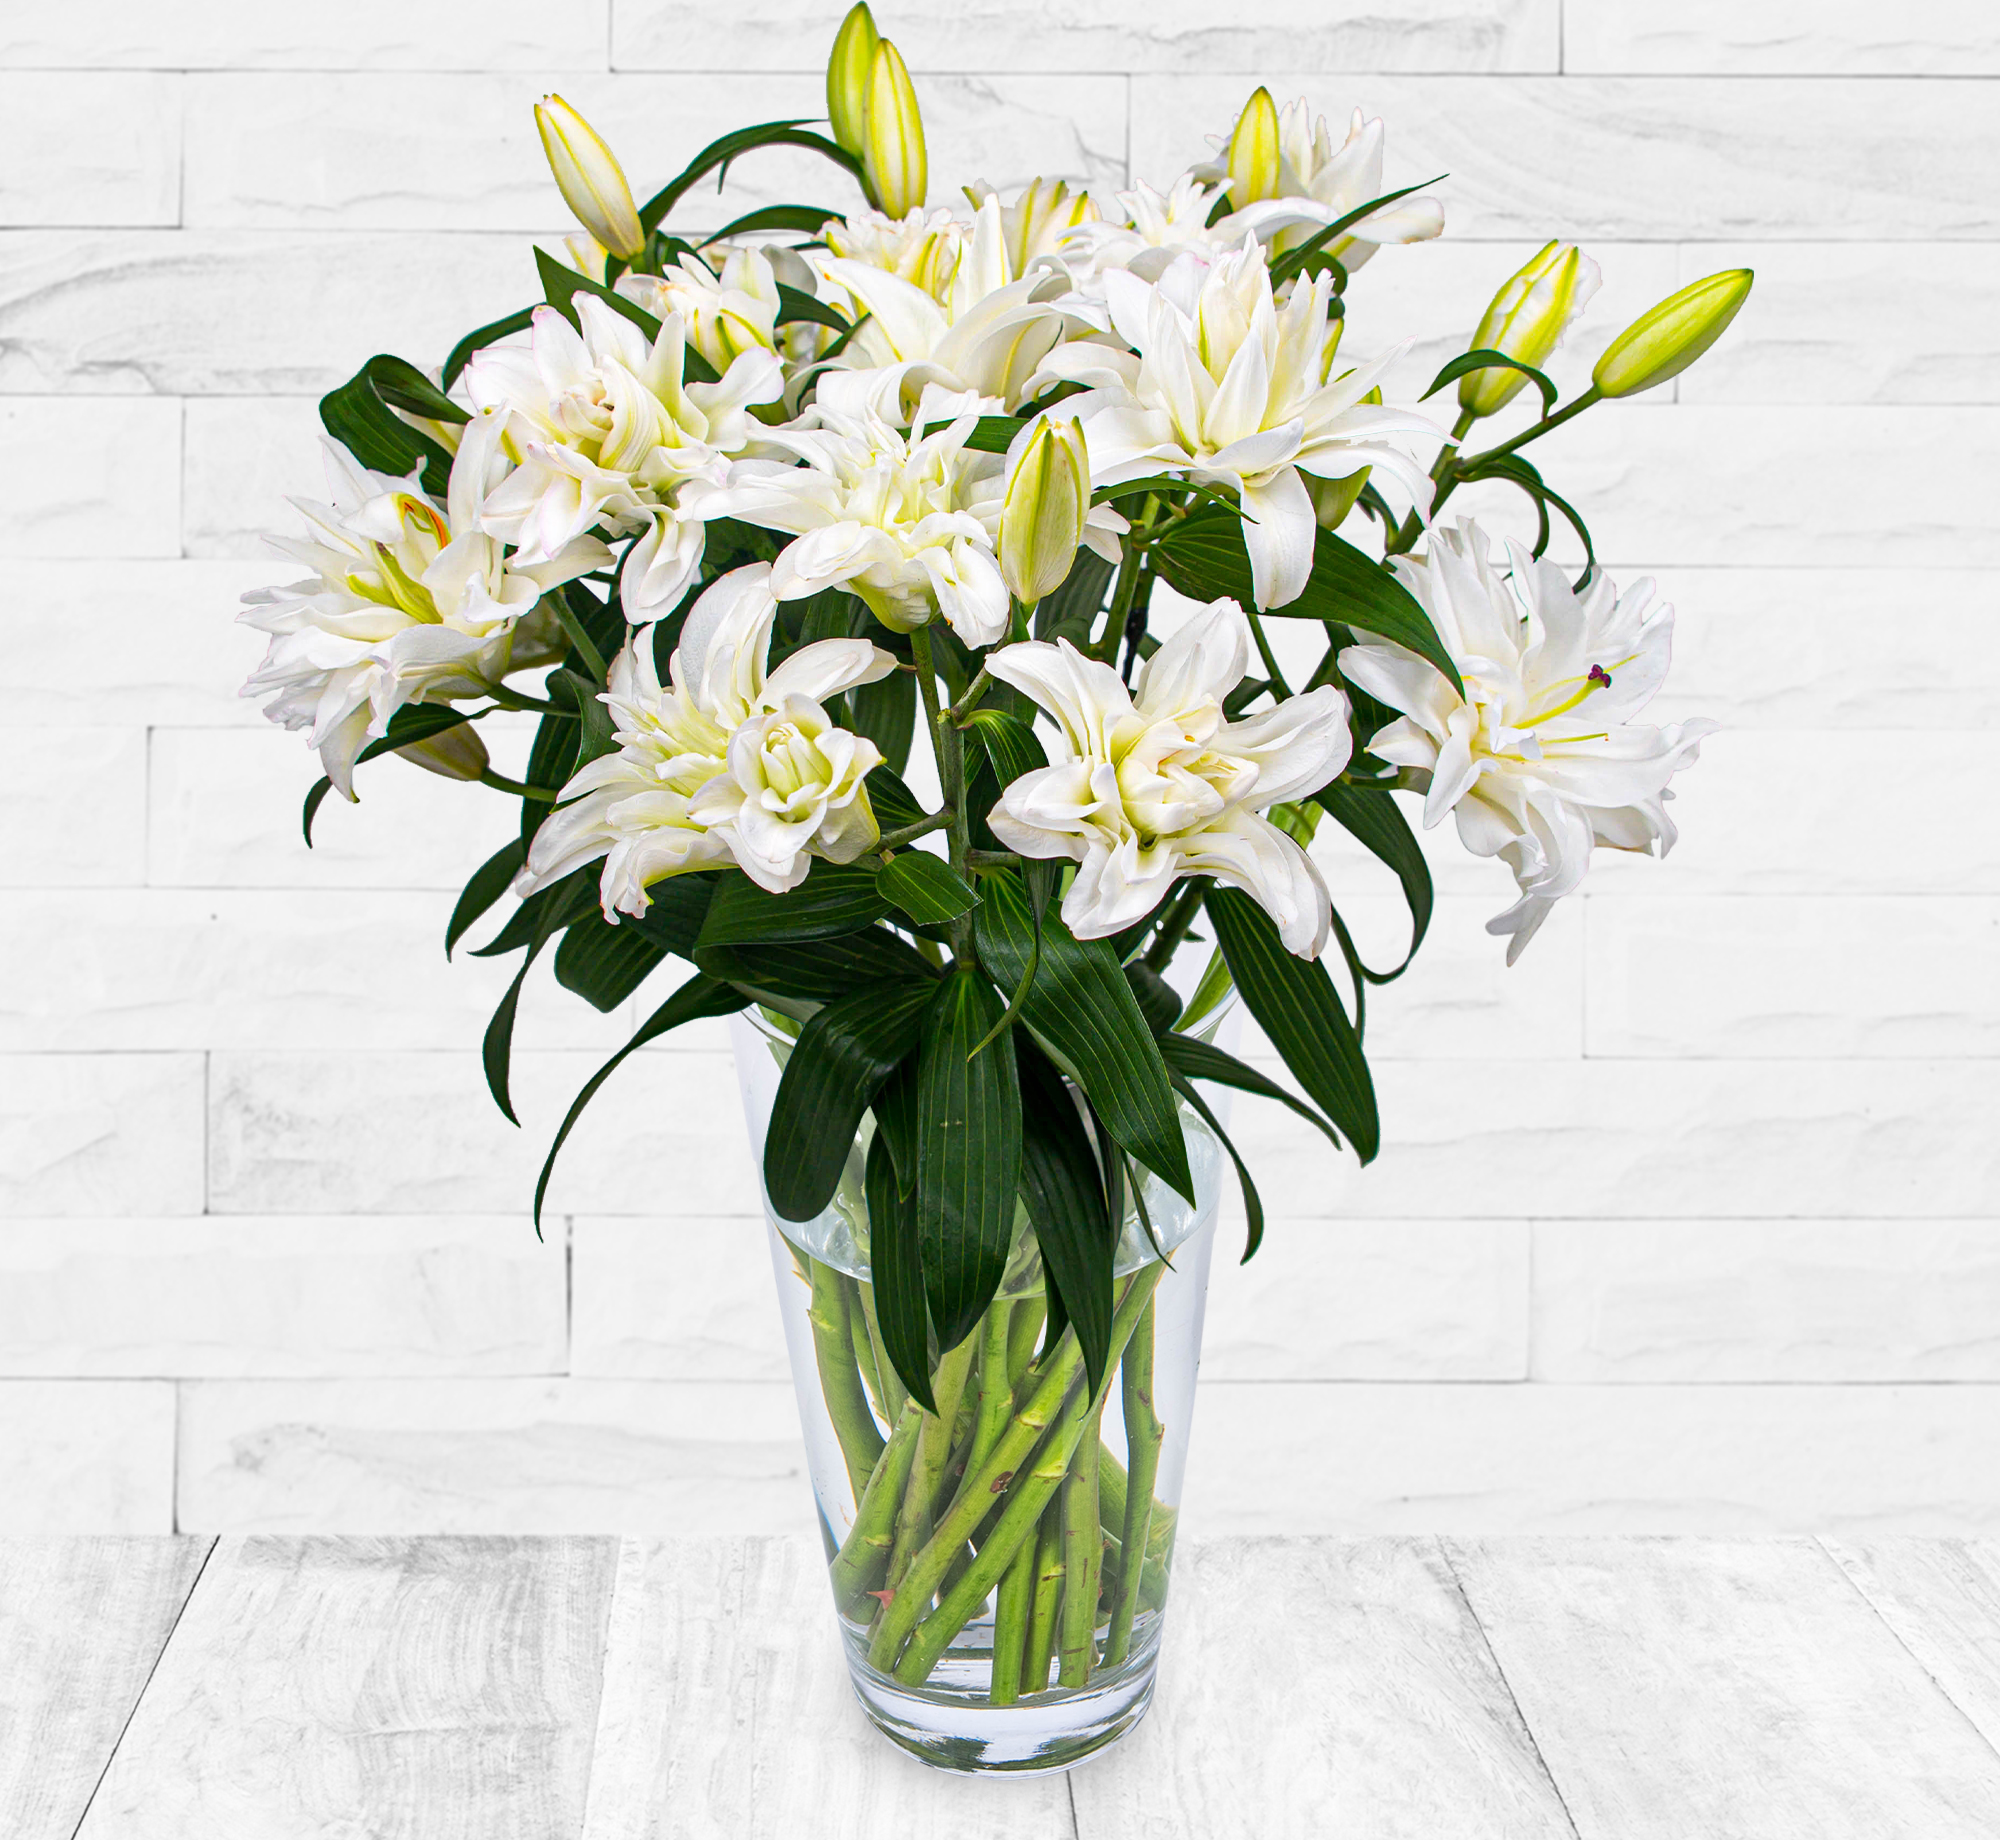 Double-flowering Lilies